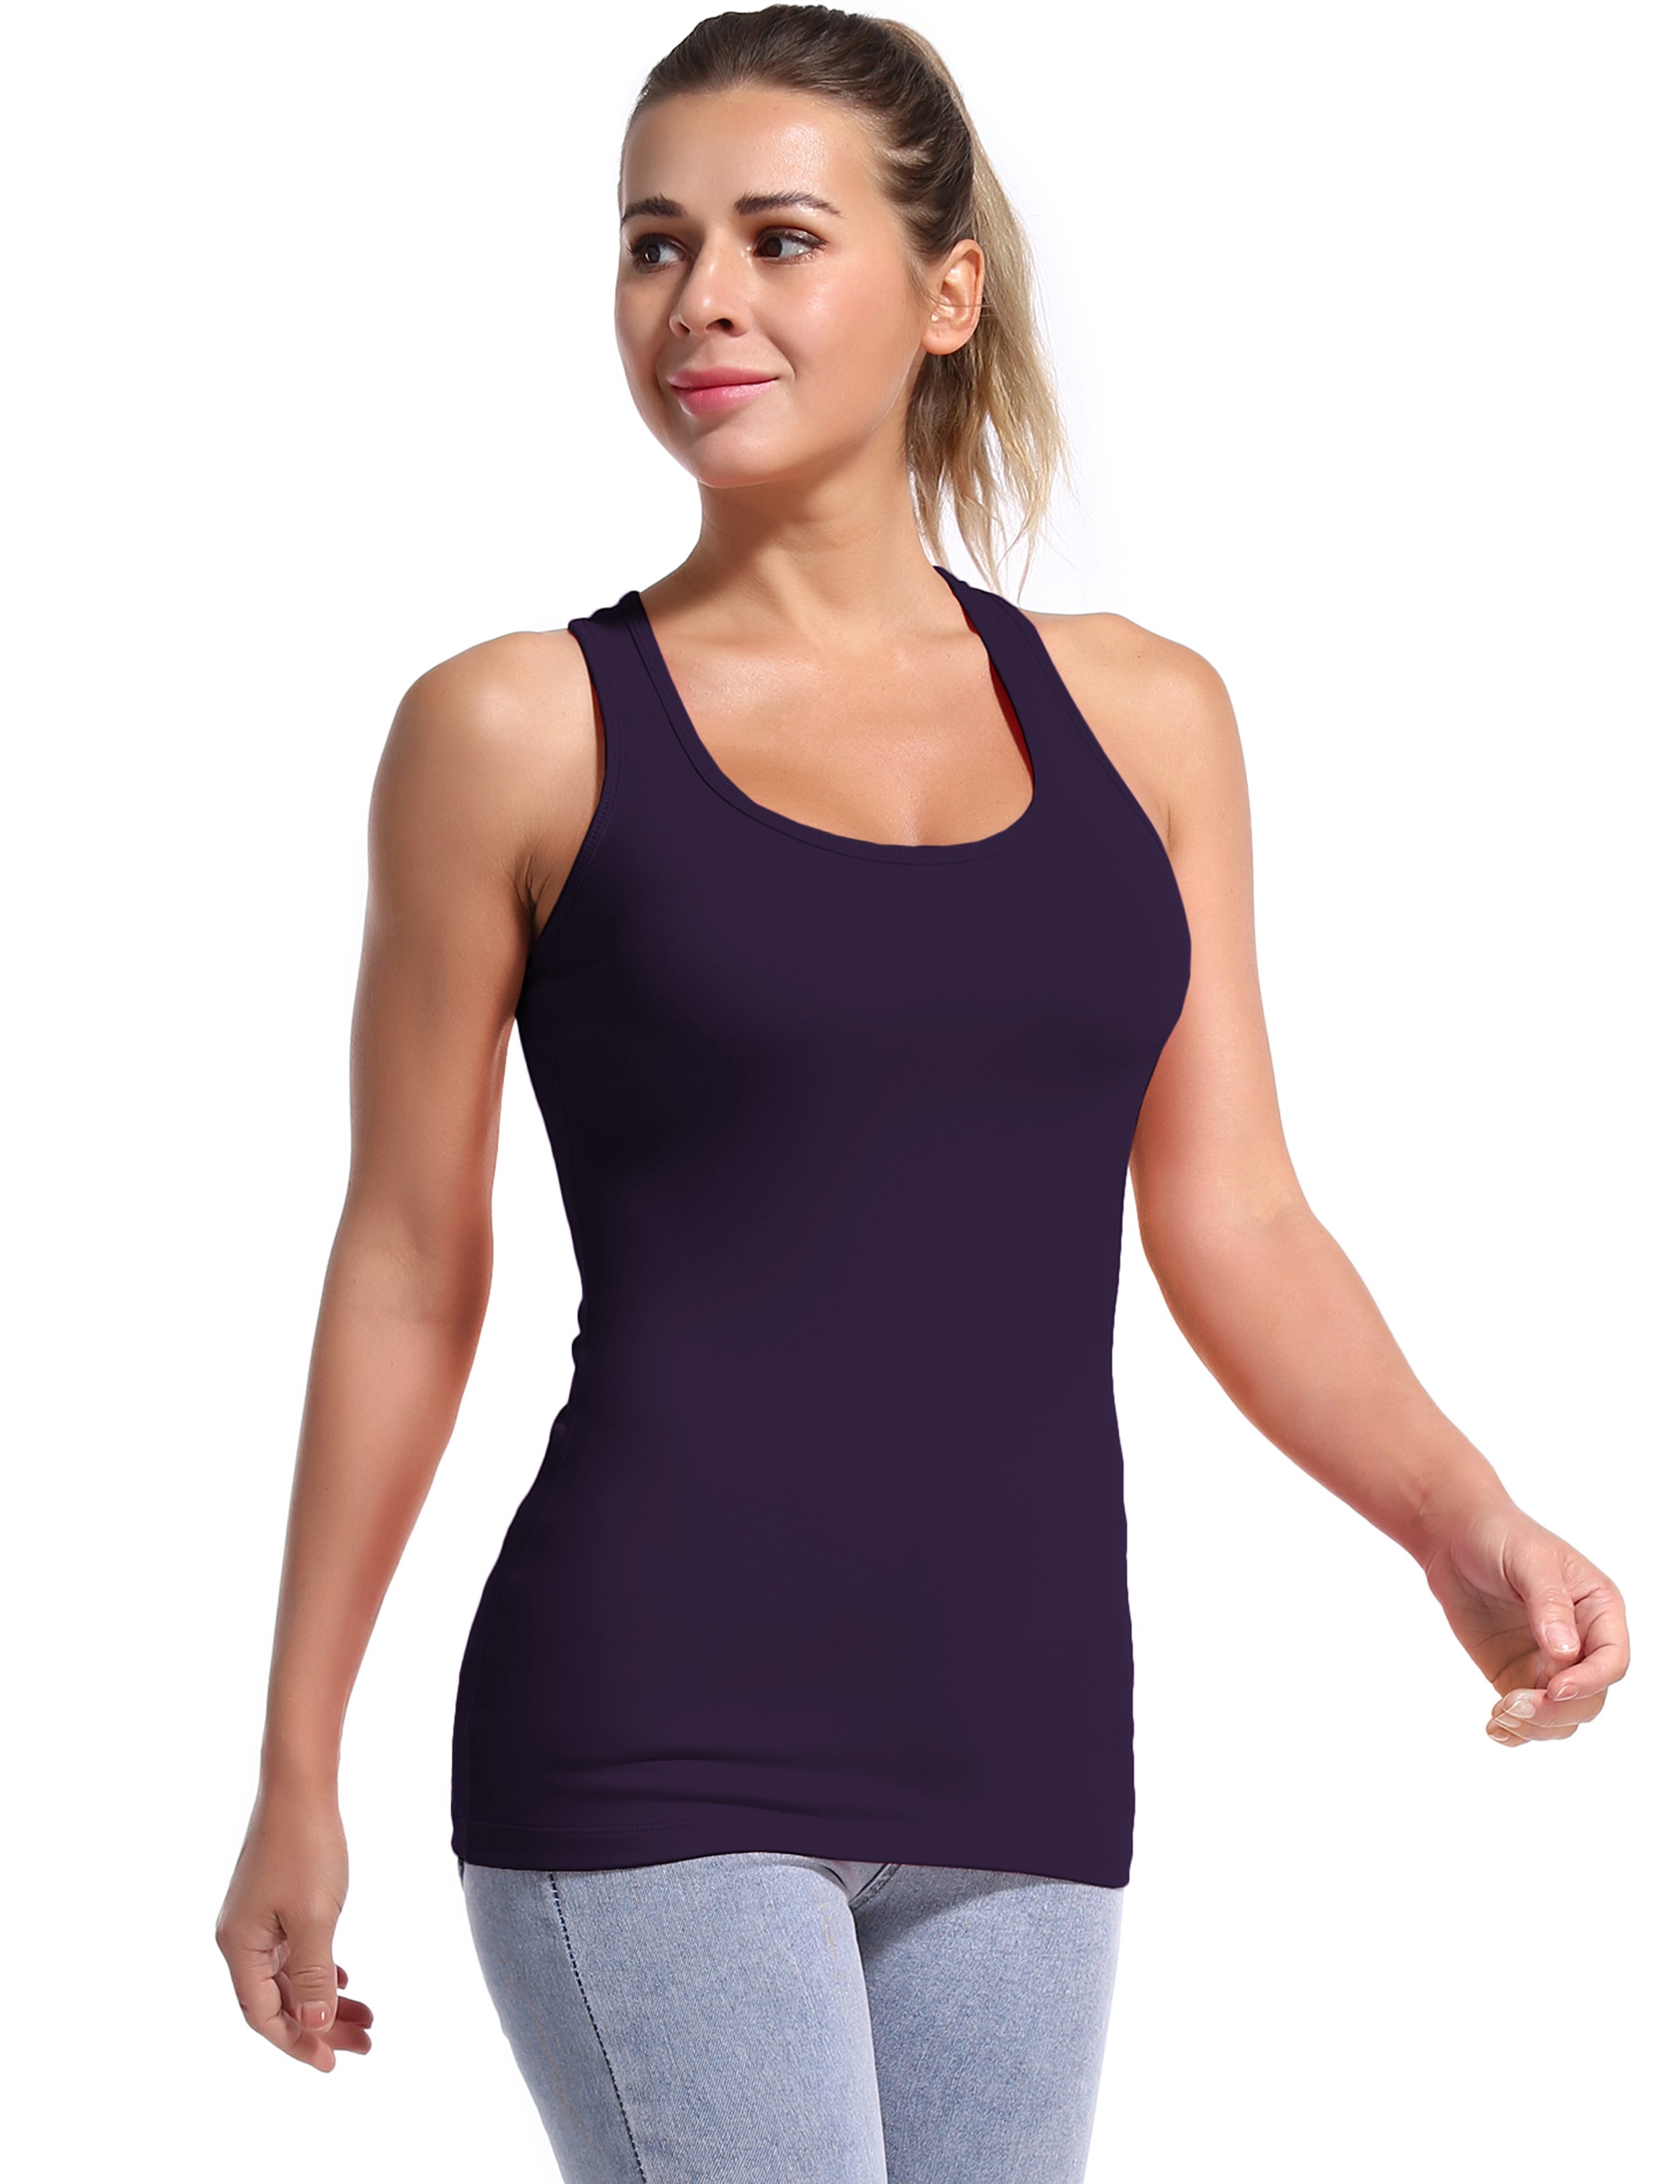 Racerback Athletic Tank Tops midnightblue 92%Nylon/8%Spandex(Cotton Soft) Designed for Pilates Tight Fit So buttery soft, it feels weightless Sweat-wicking Four-way stretch Breathable Contours your body Sits below the waistband for moderate, everyday coverage